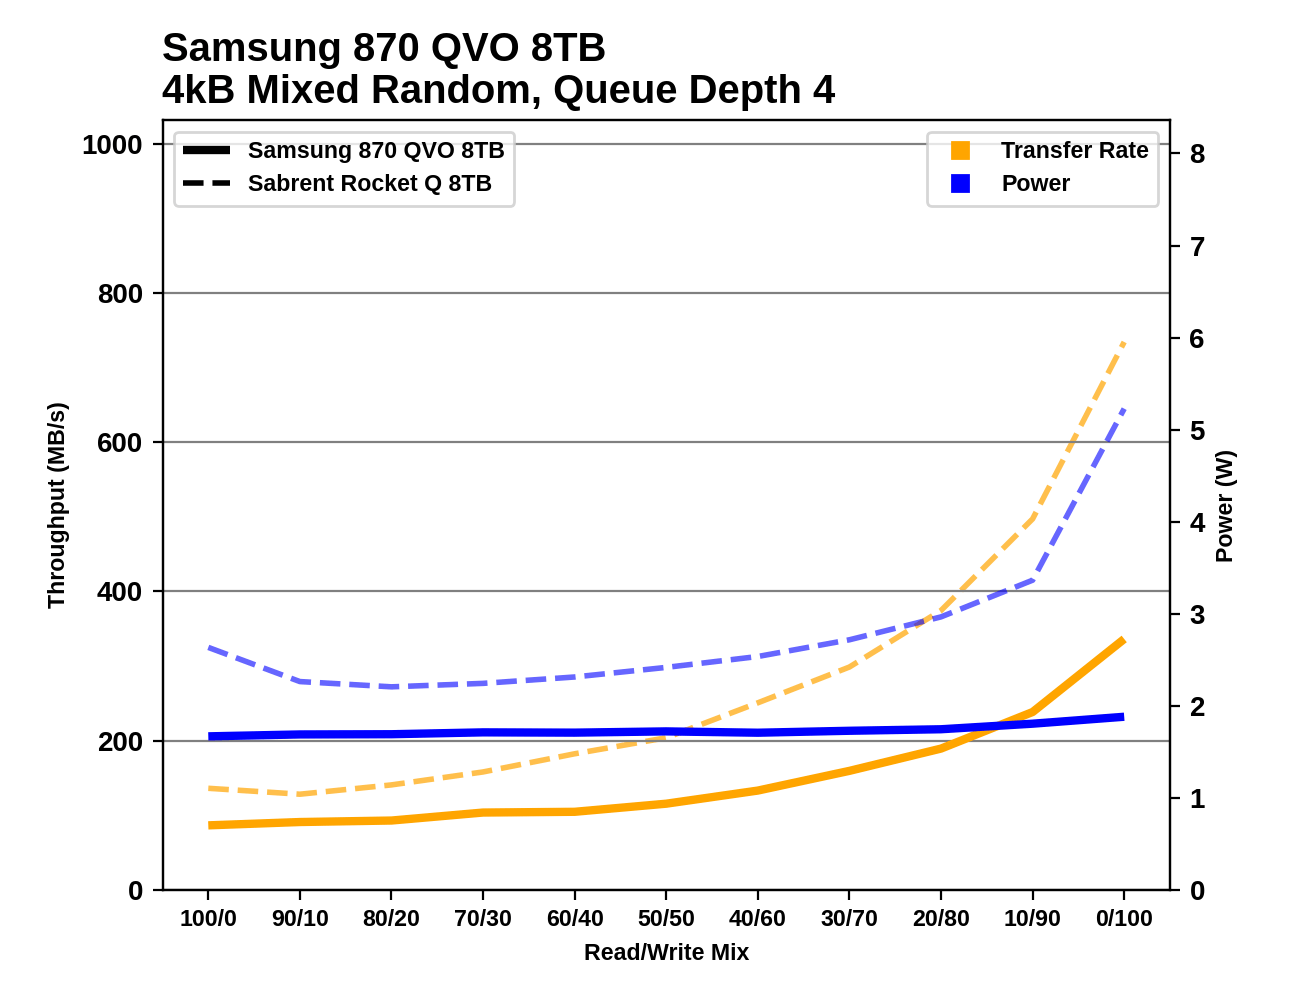 Samsung 870 QVO - High capacity promises but disappointing